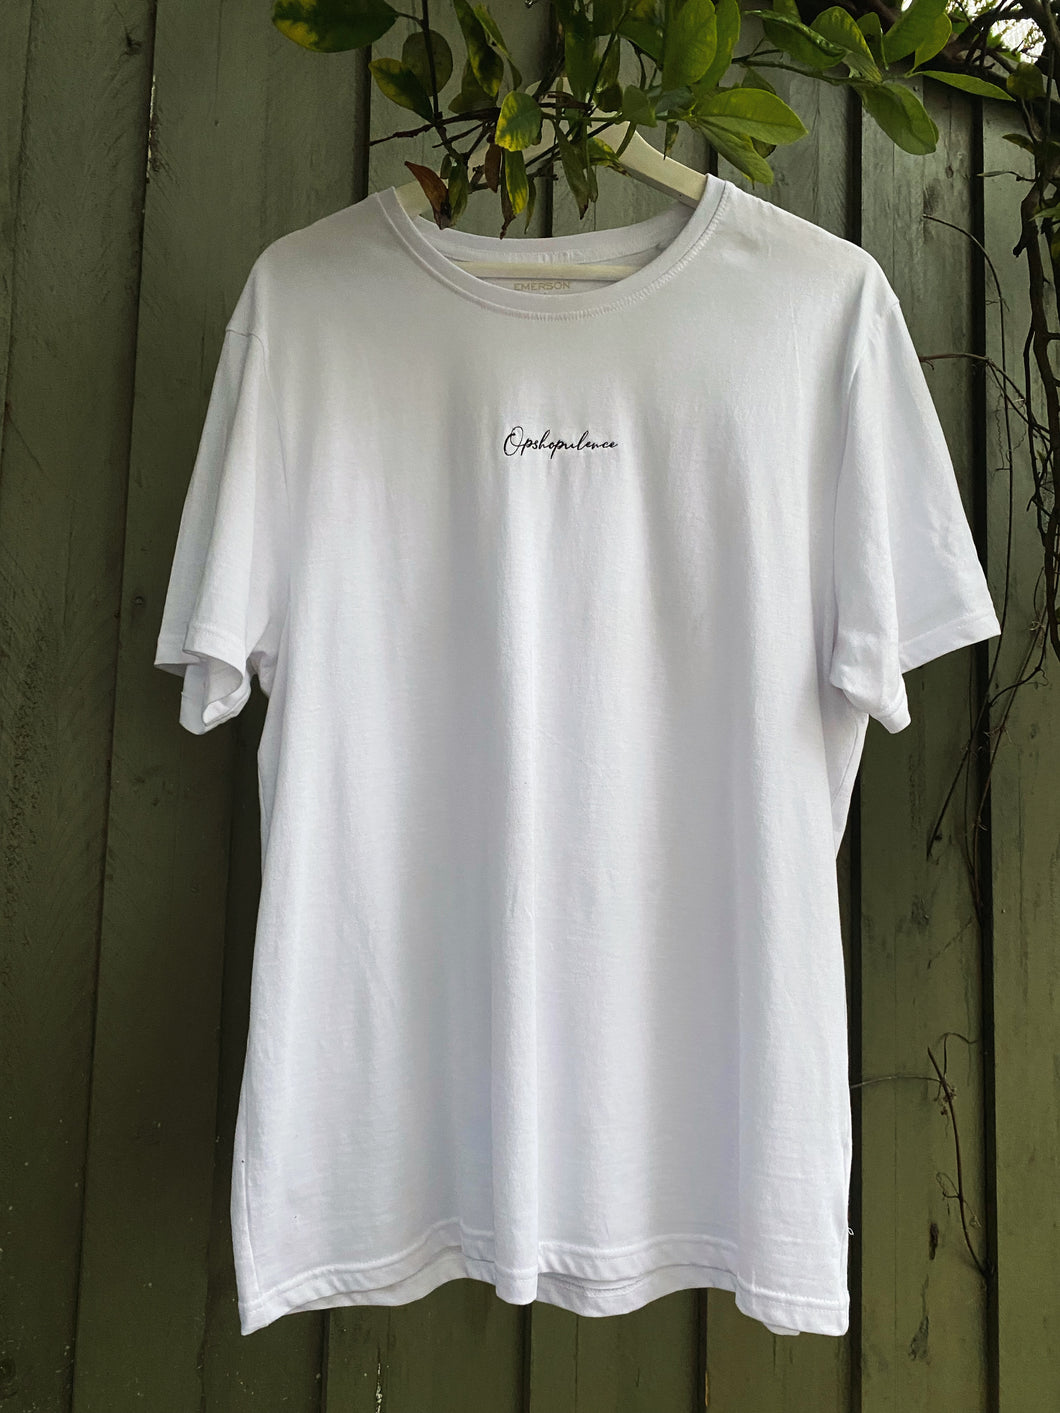 White Opshopulence Tee (Centre Embroidery)